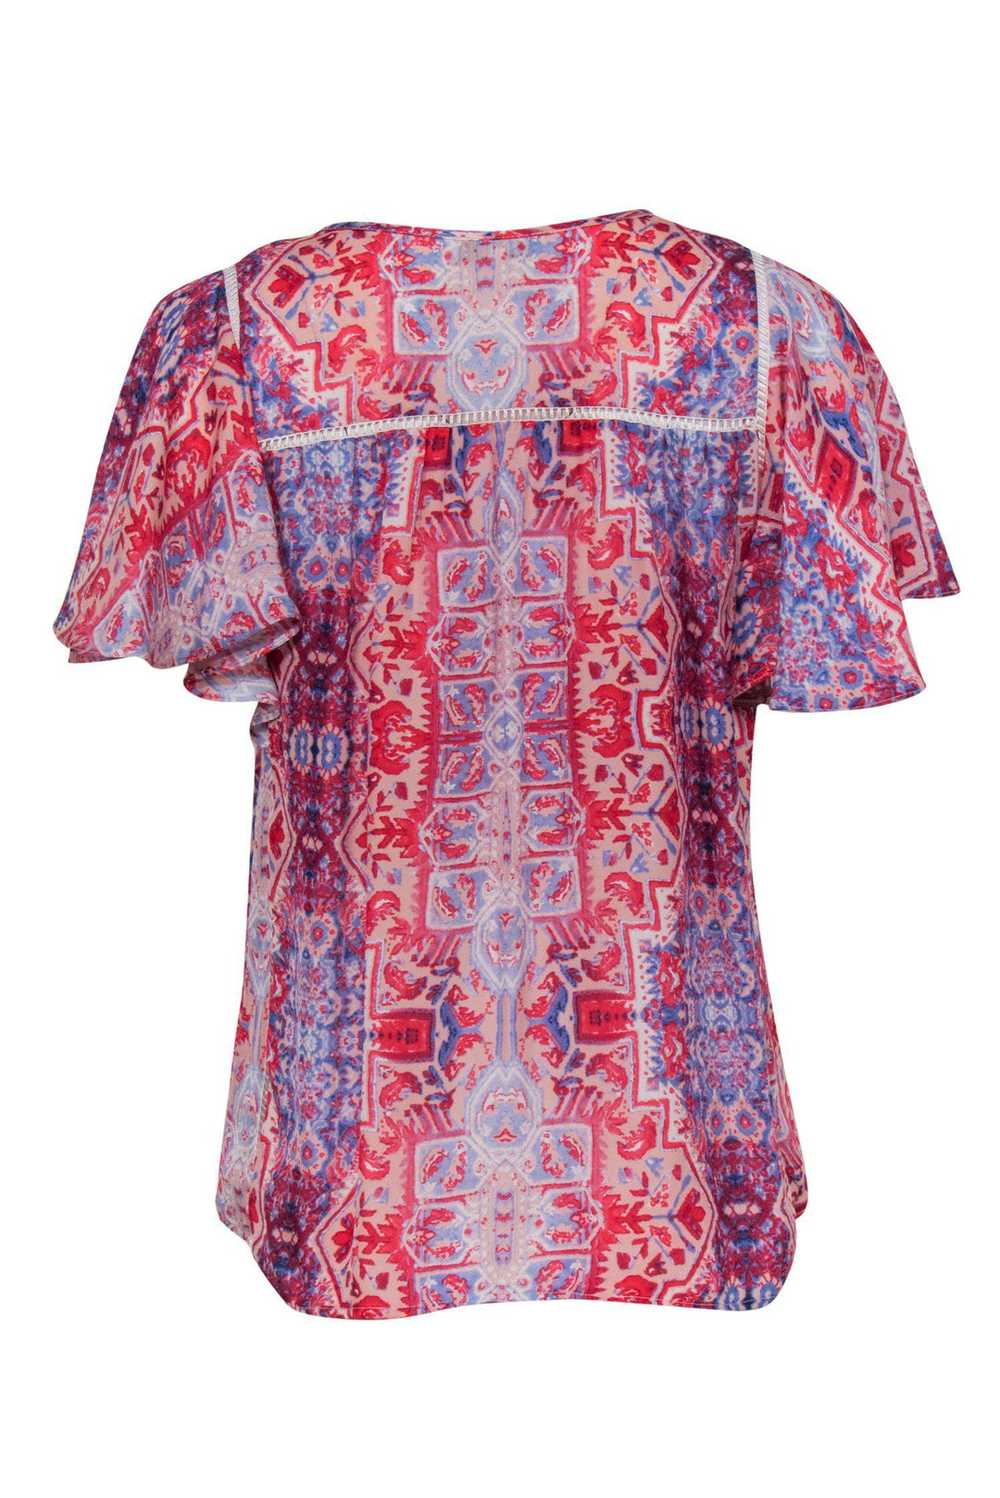 Parker - Red & Blue Ruffle Sleeve Printed Blouse … - image 3